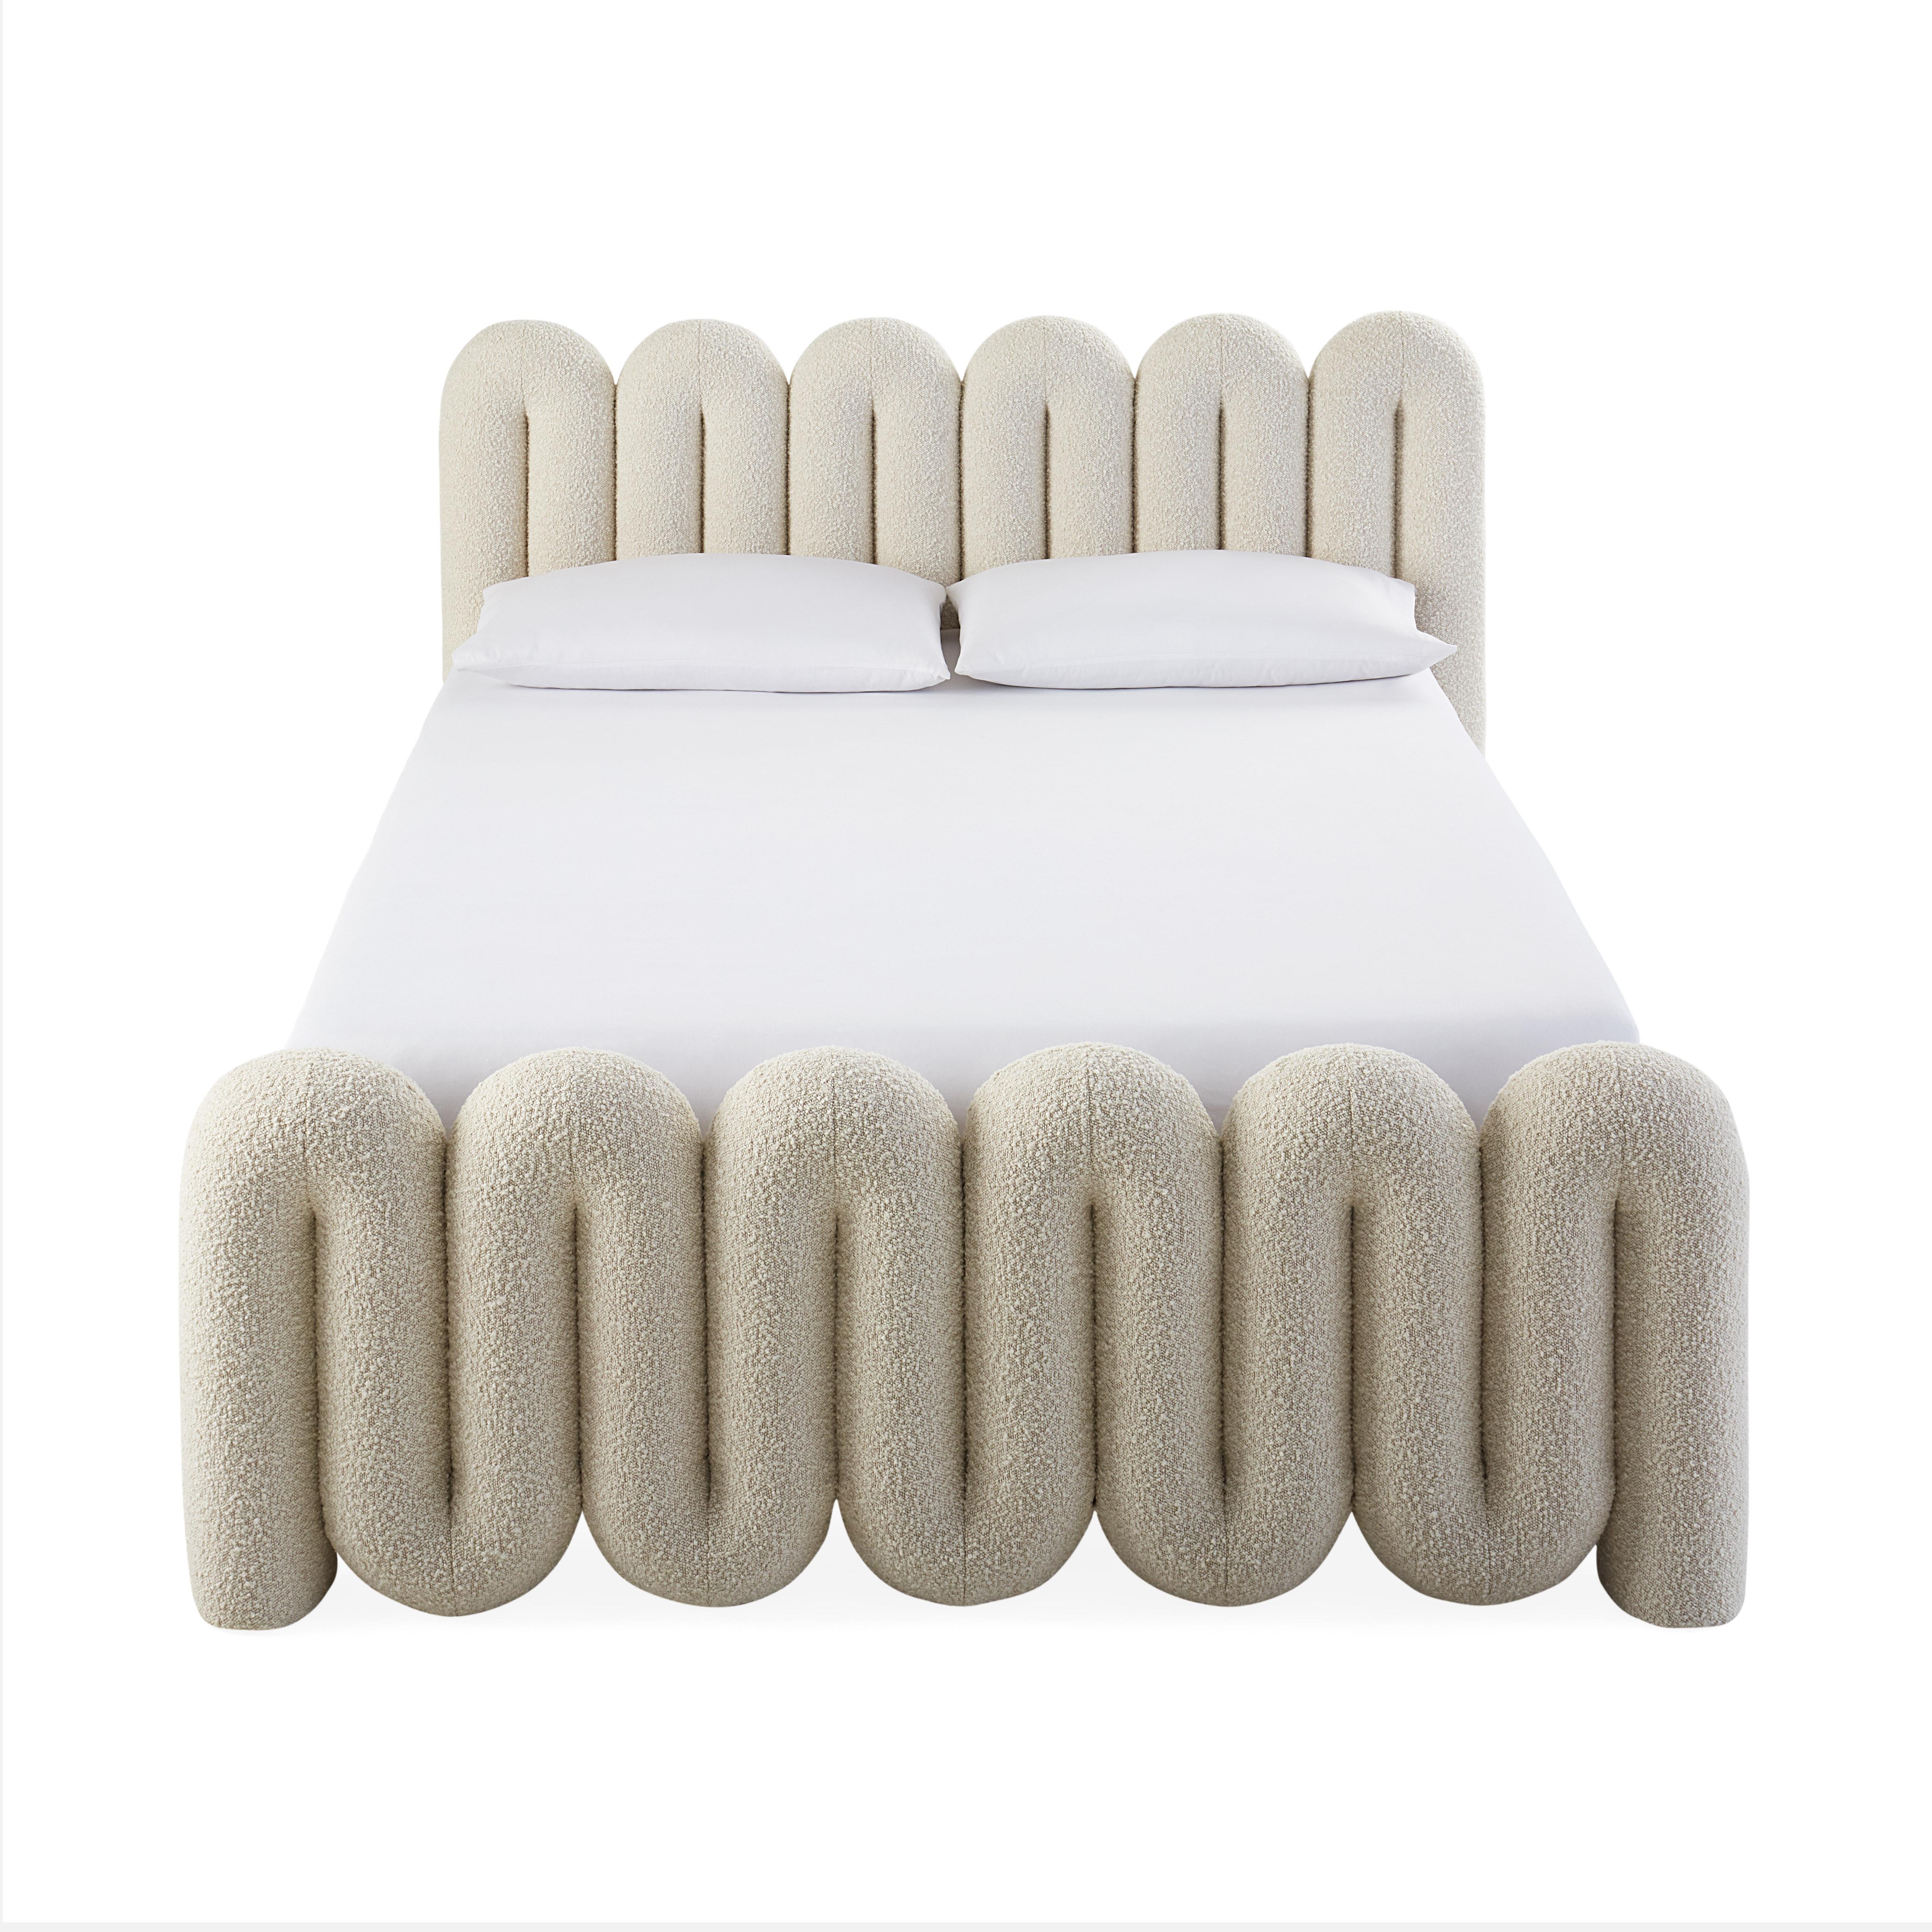 Modern Serpentine Upholstered Queen Bed For Sale